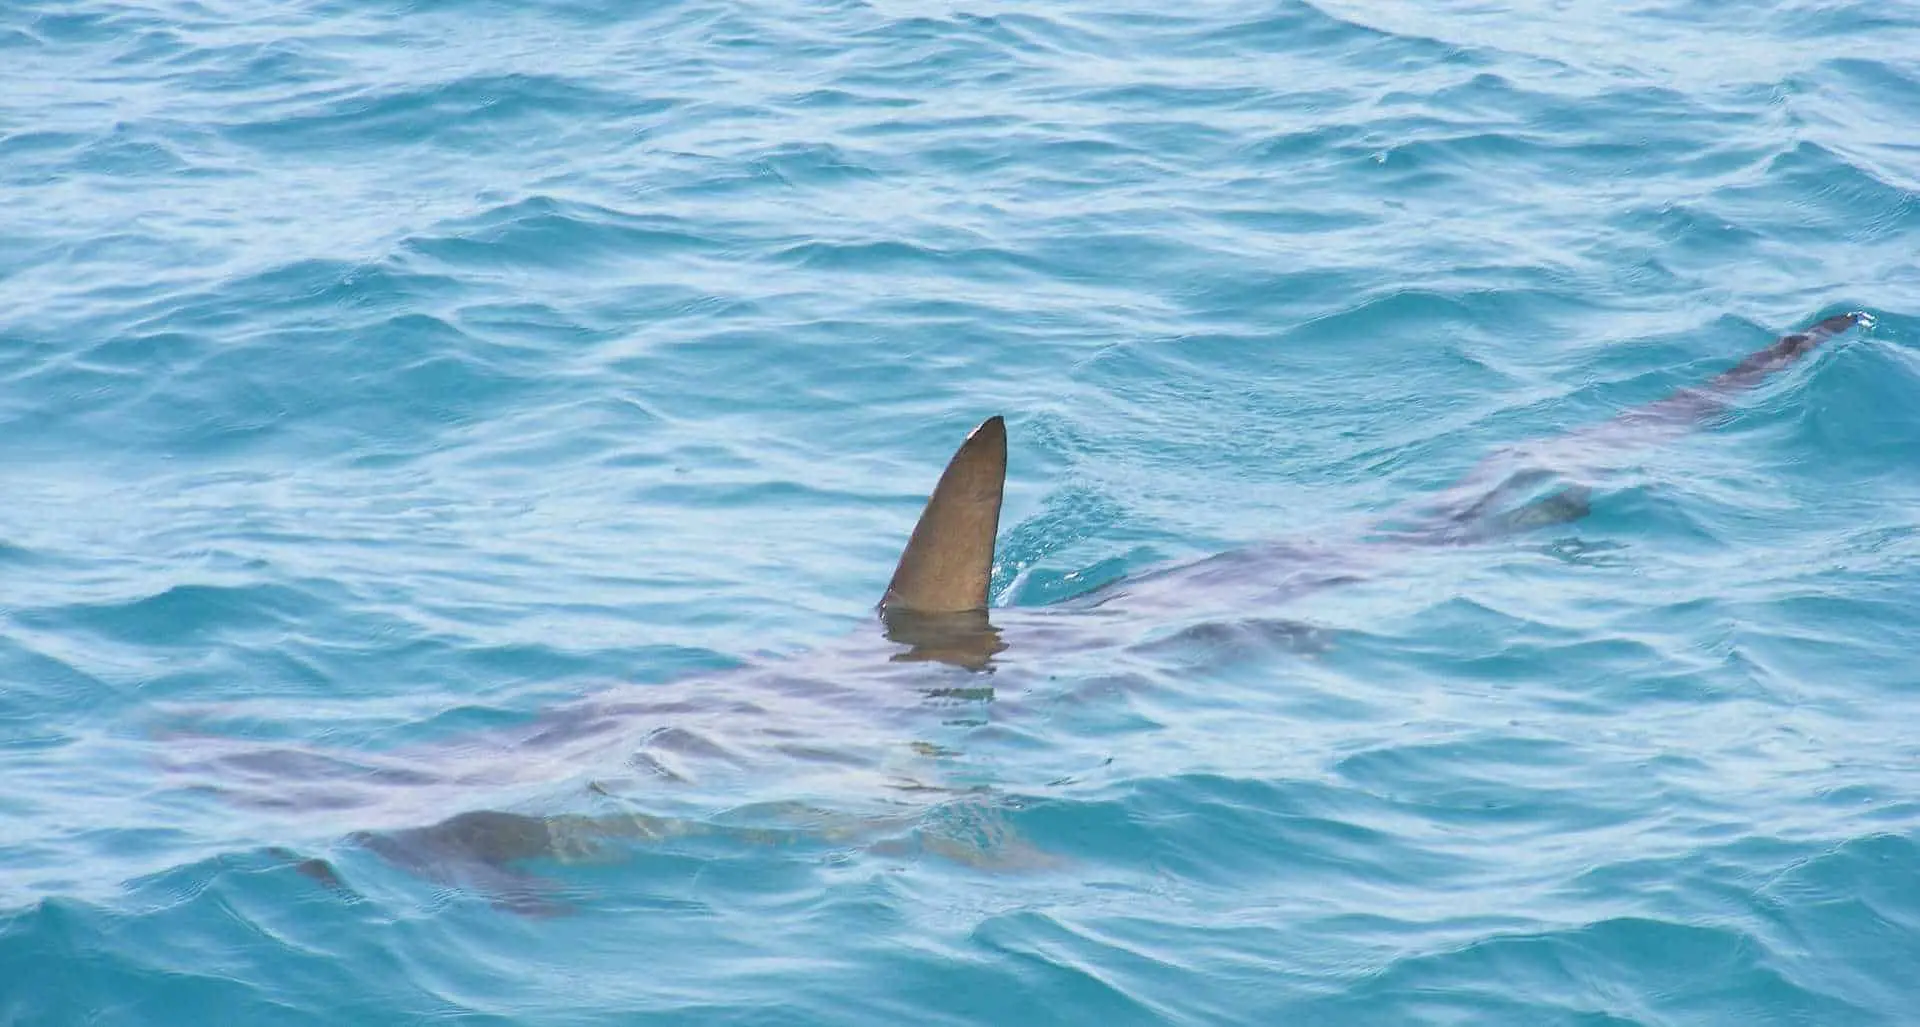 A shark in the water with his fin peeking out of the water.